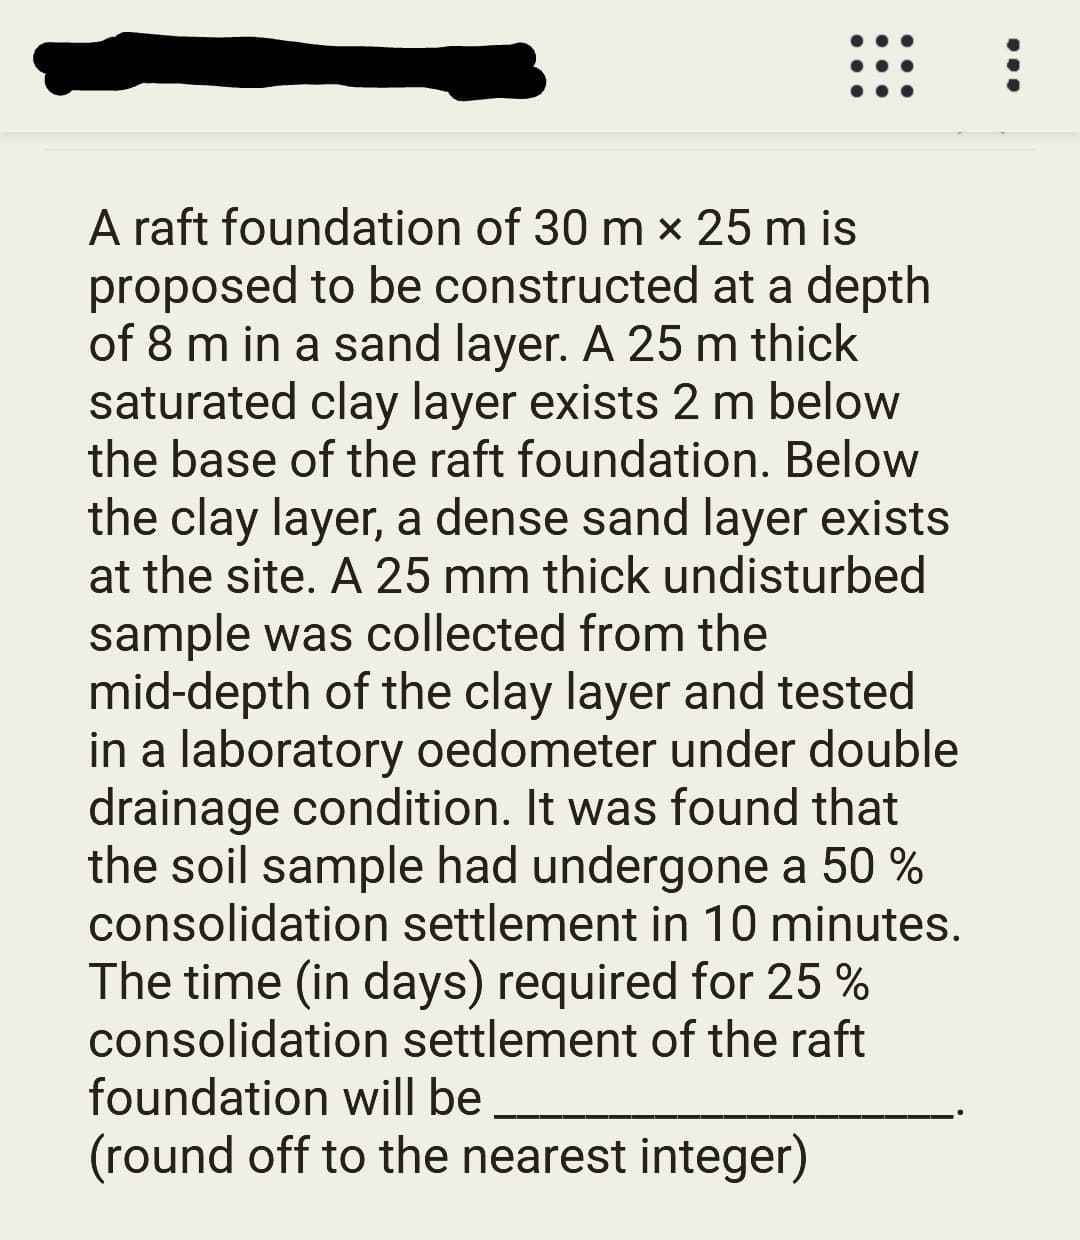 A raft foundation of 30 m x 25 m is
proposed to be constructed at a depth
of 8 m in a sand layer. A 25 m thick
saturated clay layer exists 2 m below
the base of the raft foundation. Below
the clay layer, a dense sand layer exists
at the site. A 25 mm thick undisturbed
sample was collected from the
mid-depth of the clay layer and tested
in a laboratory oedometer under double
drainage condition. It was found that
the soil sample had undergone a 50 %
consolidation settlement in 10 minutes.
The time (in days) required for 25 %
consolidation settlement of the raft
foundation will be
(round off to the nearest integer)
...